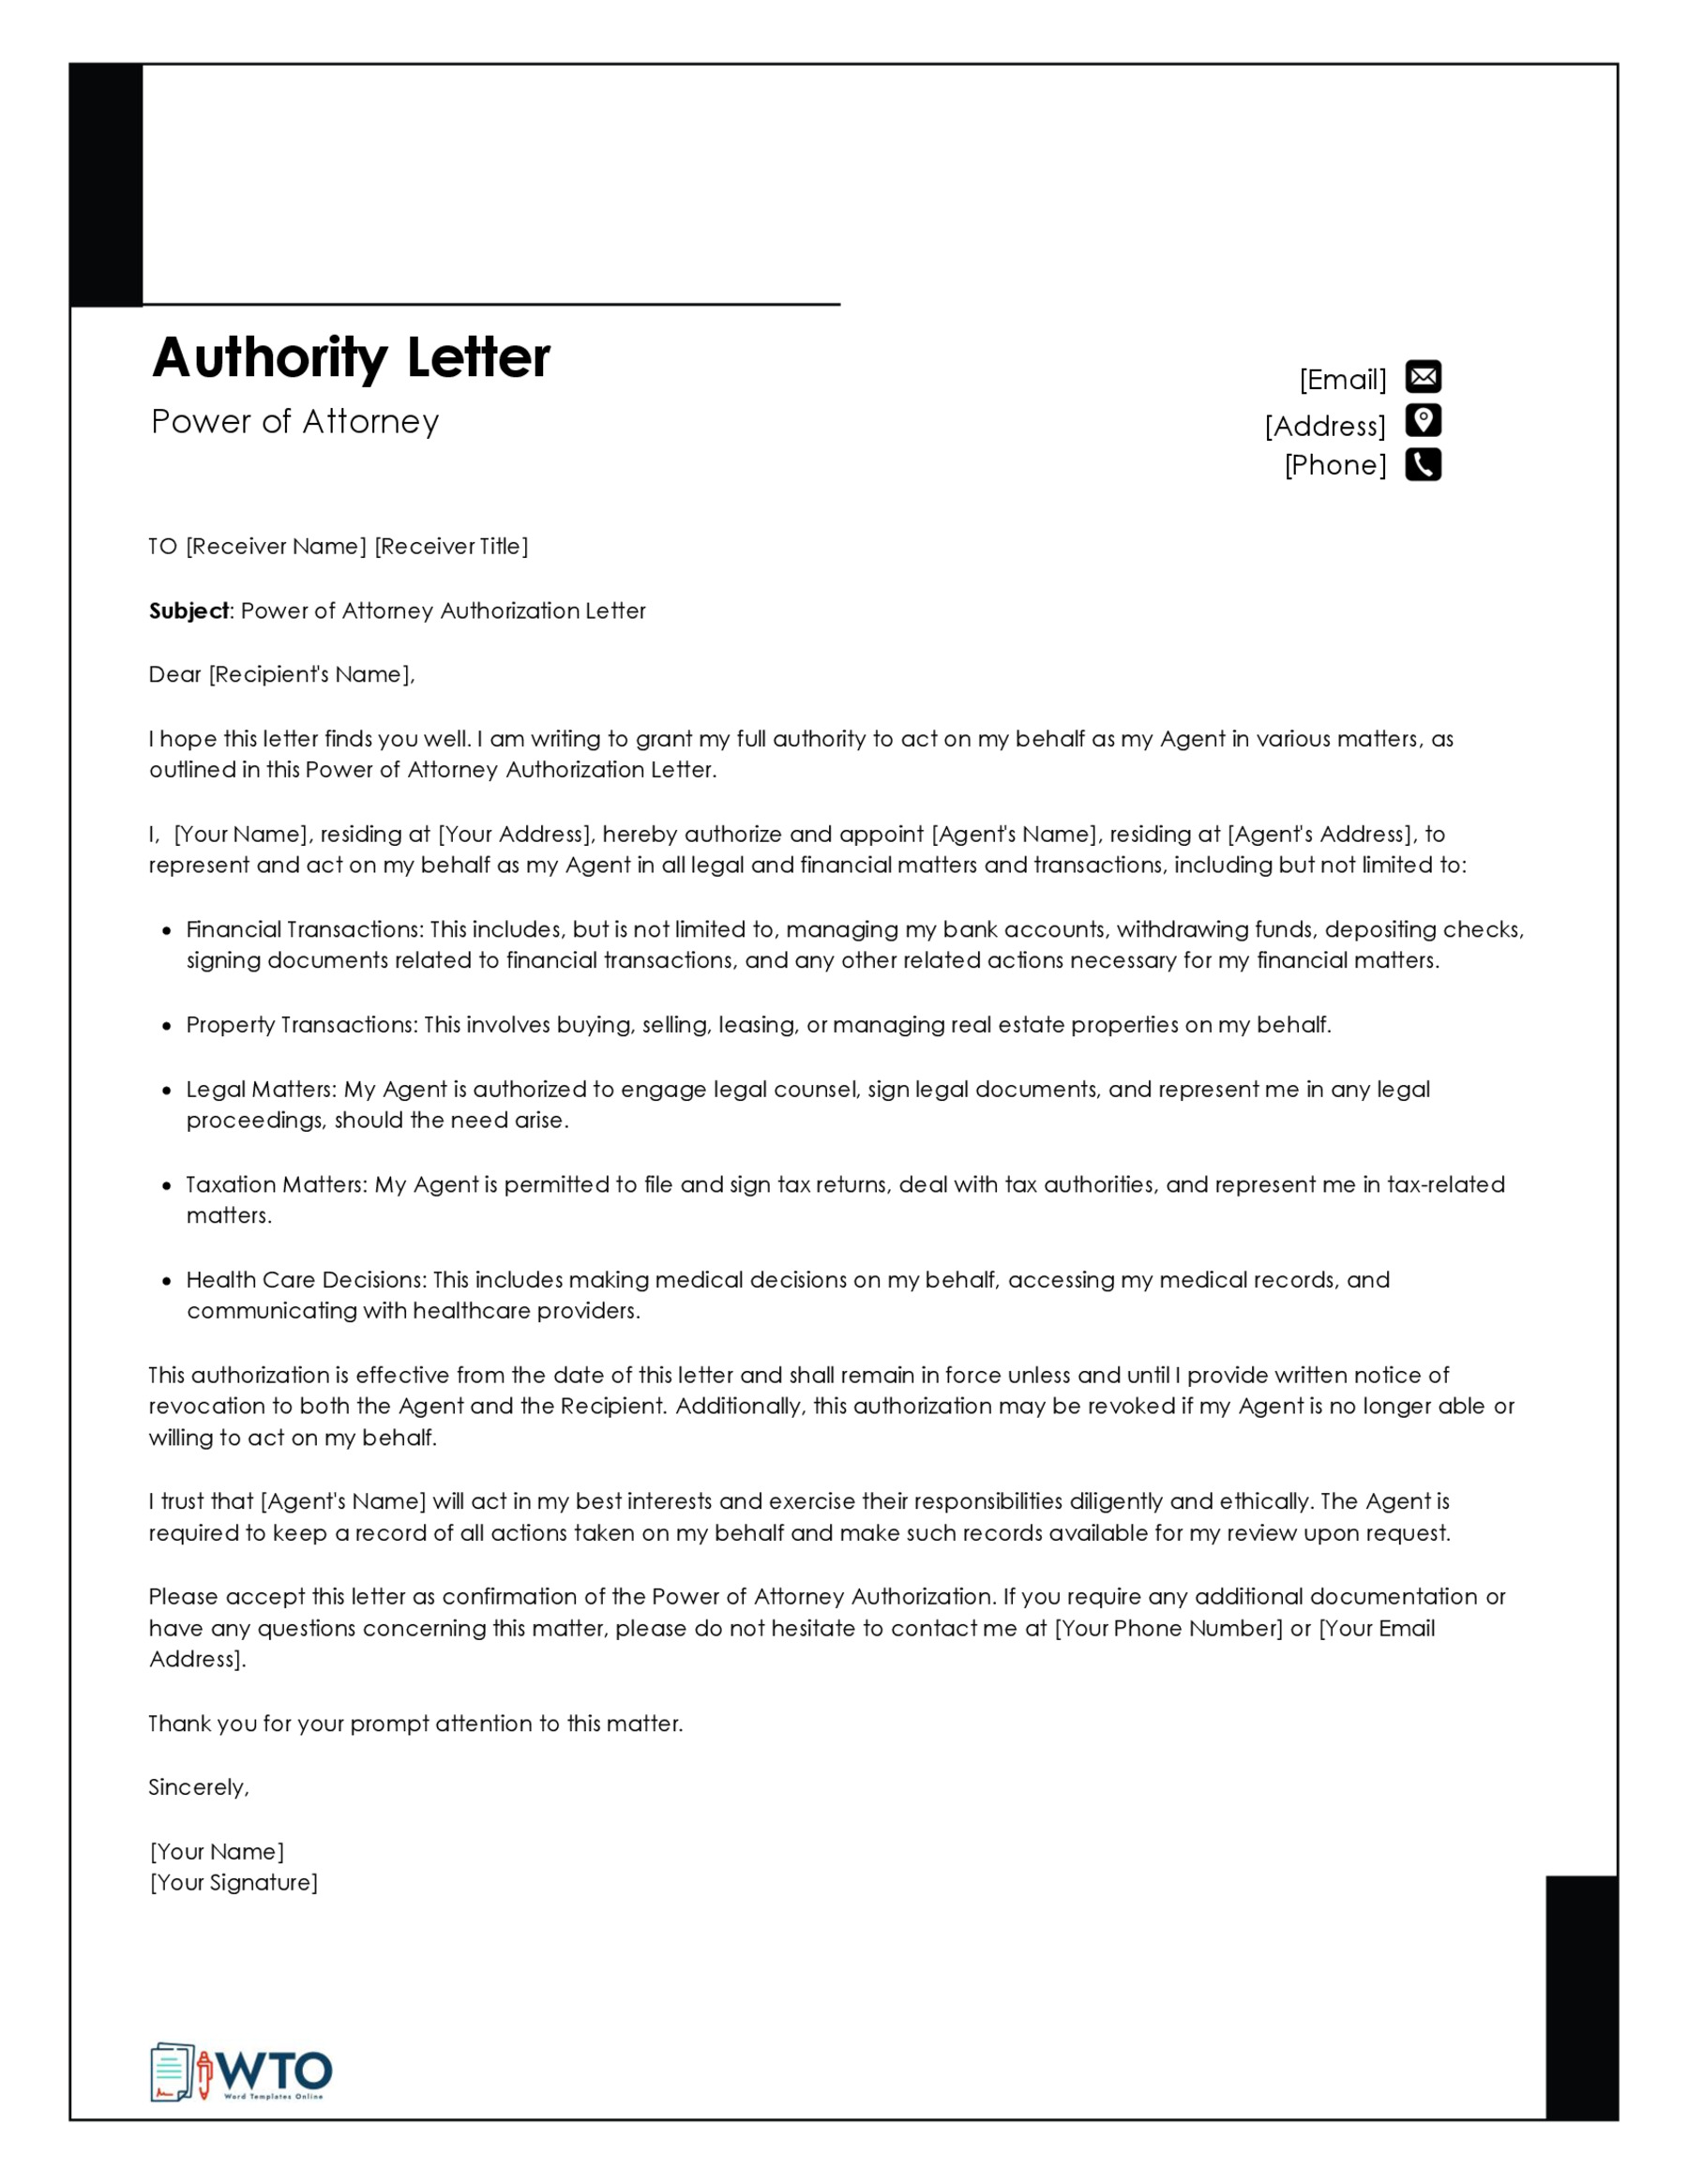 Free Power of Attorney Authorization Letter Template 03 for Word